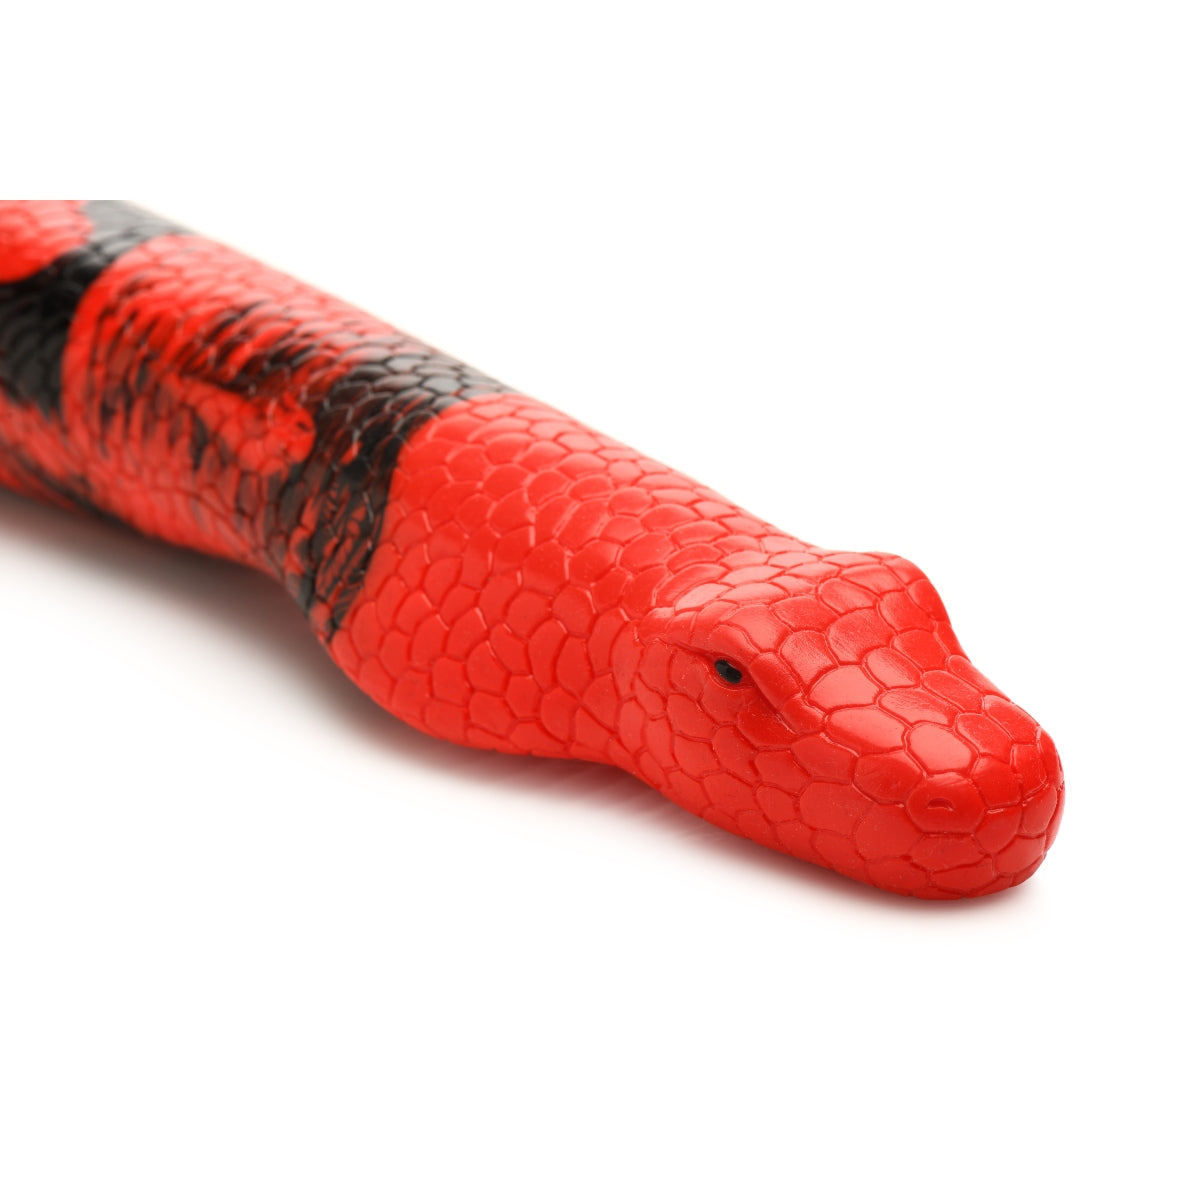 Creature Cocks King Cobra XL Silicone Dong Red Black - Simply Pleasure